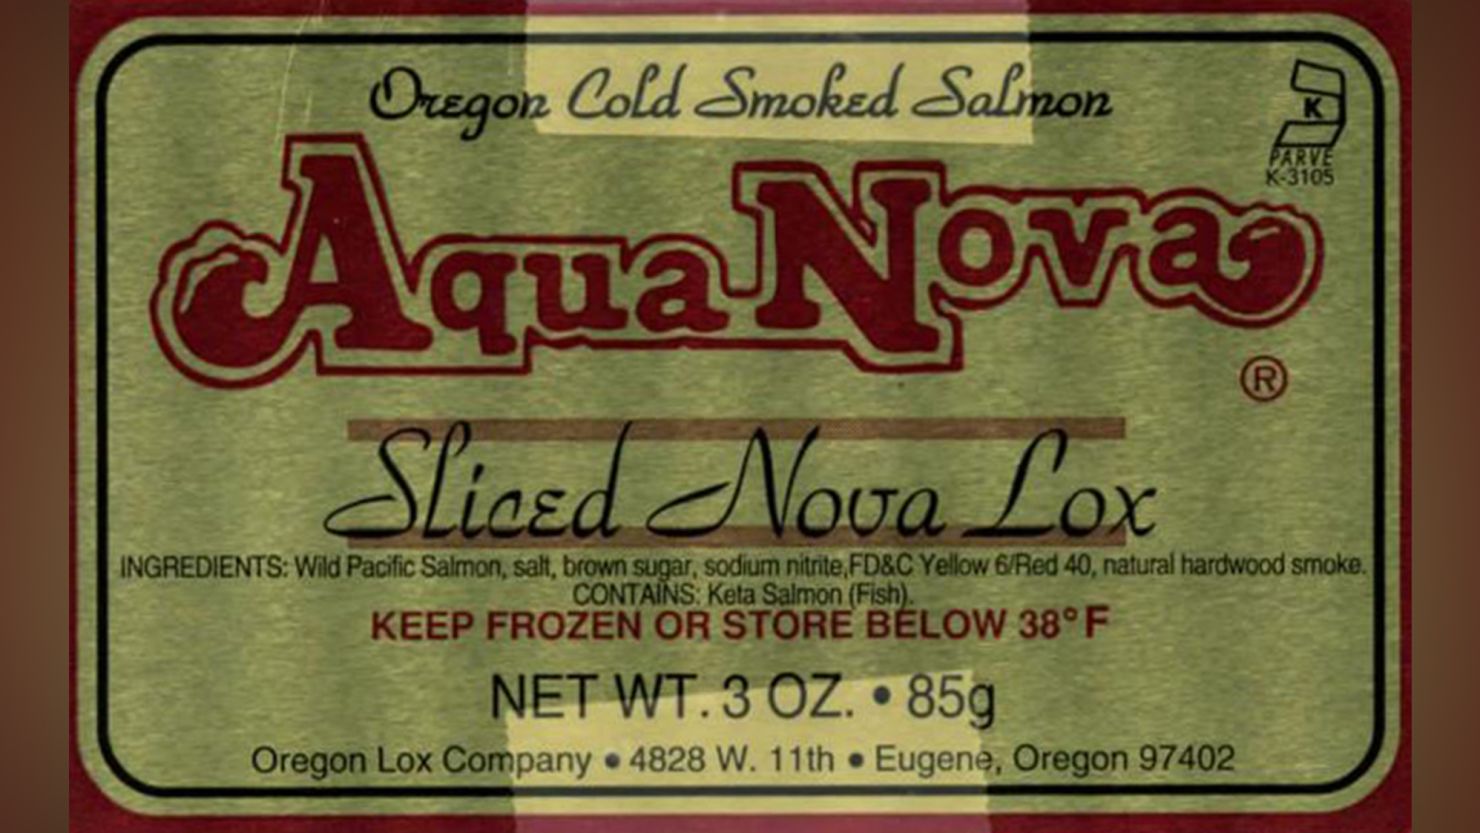 The Oregon Lox company issued a recall for this and several other products. 